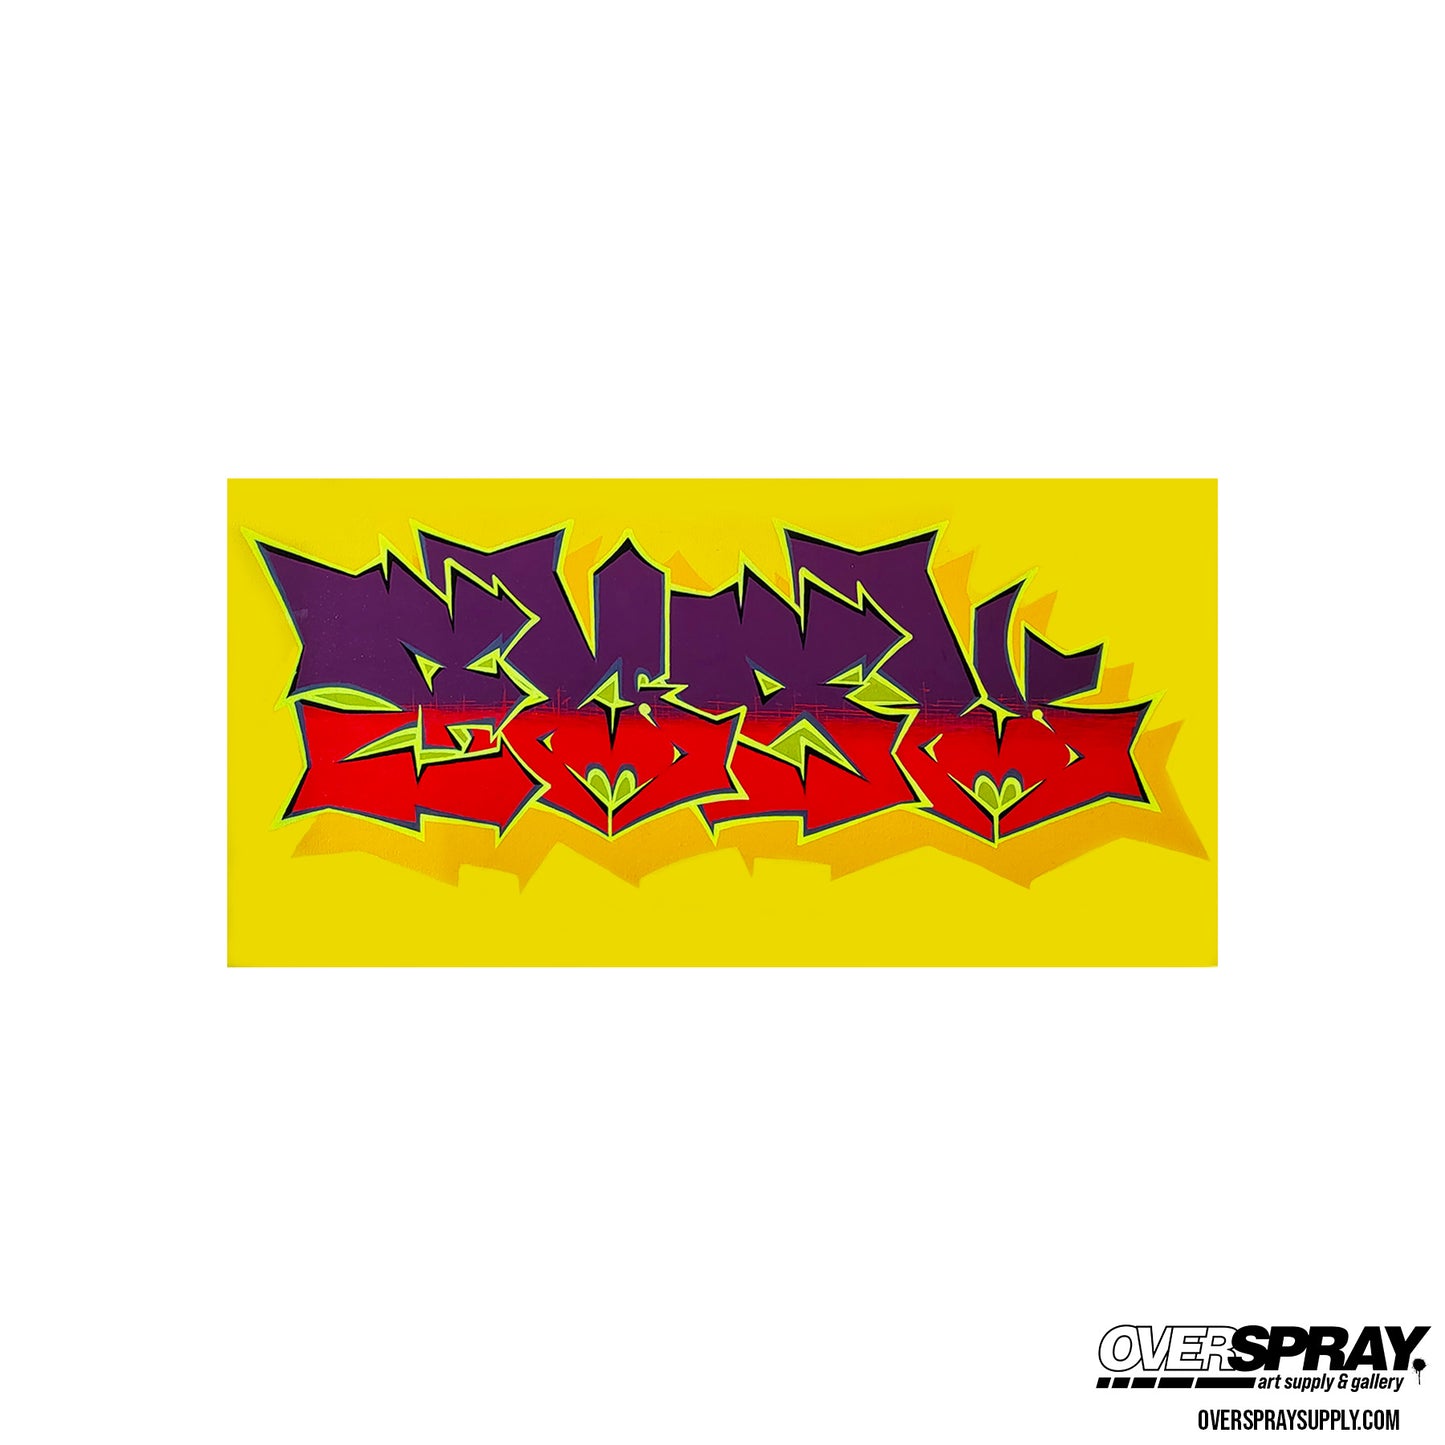 Yellow art with graffiti style letters reading "EASK" in angled, pointy font, colored purple on top, fading to a bright red at the bottom with a back shadow of a medium yellow